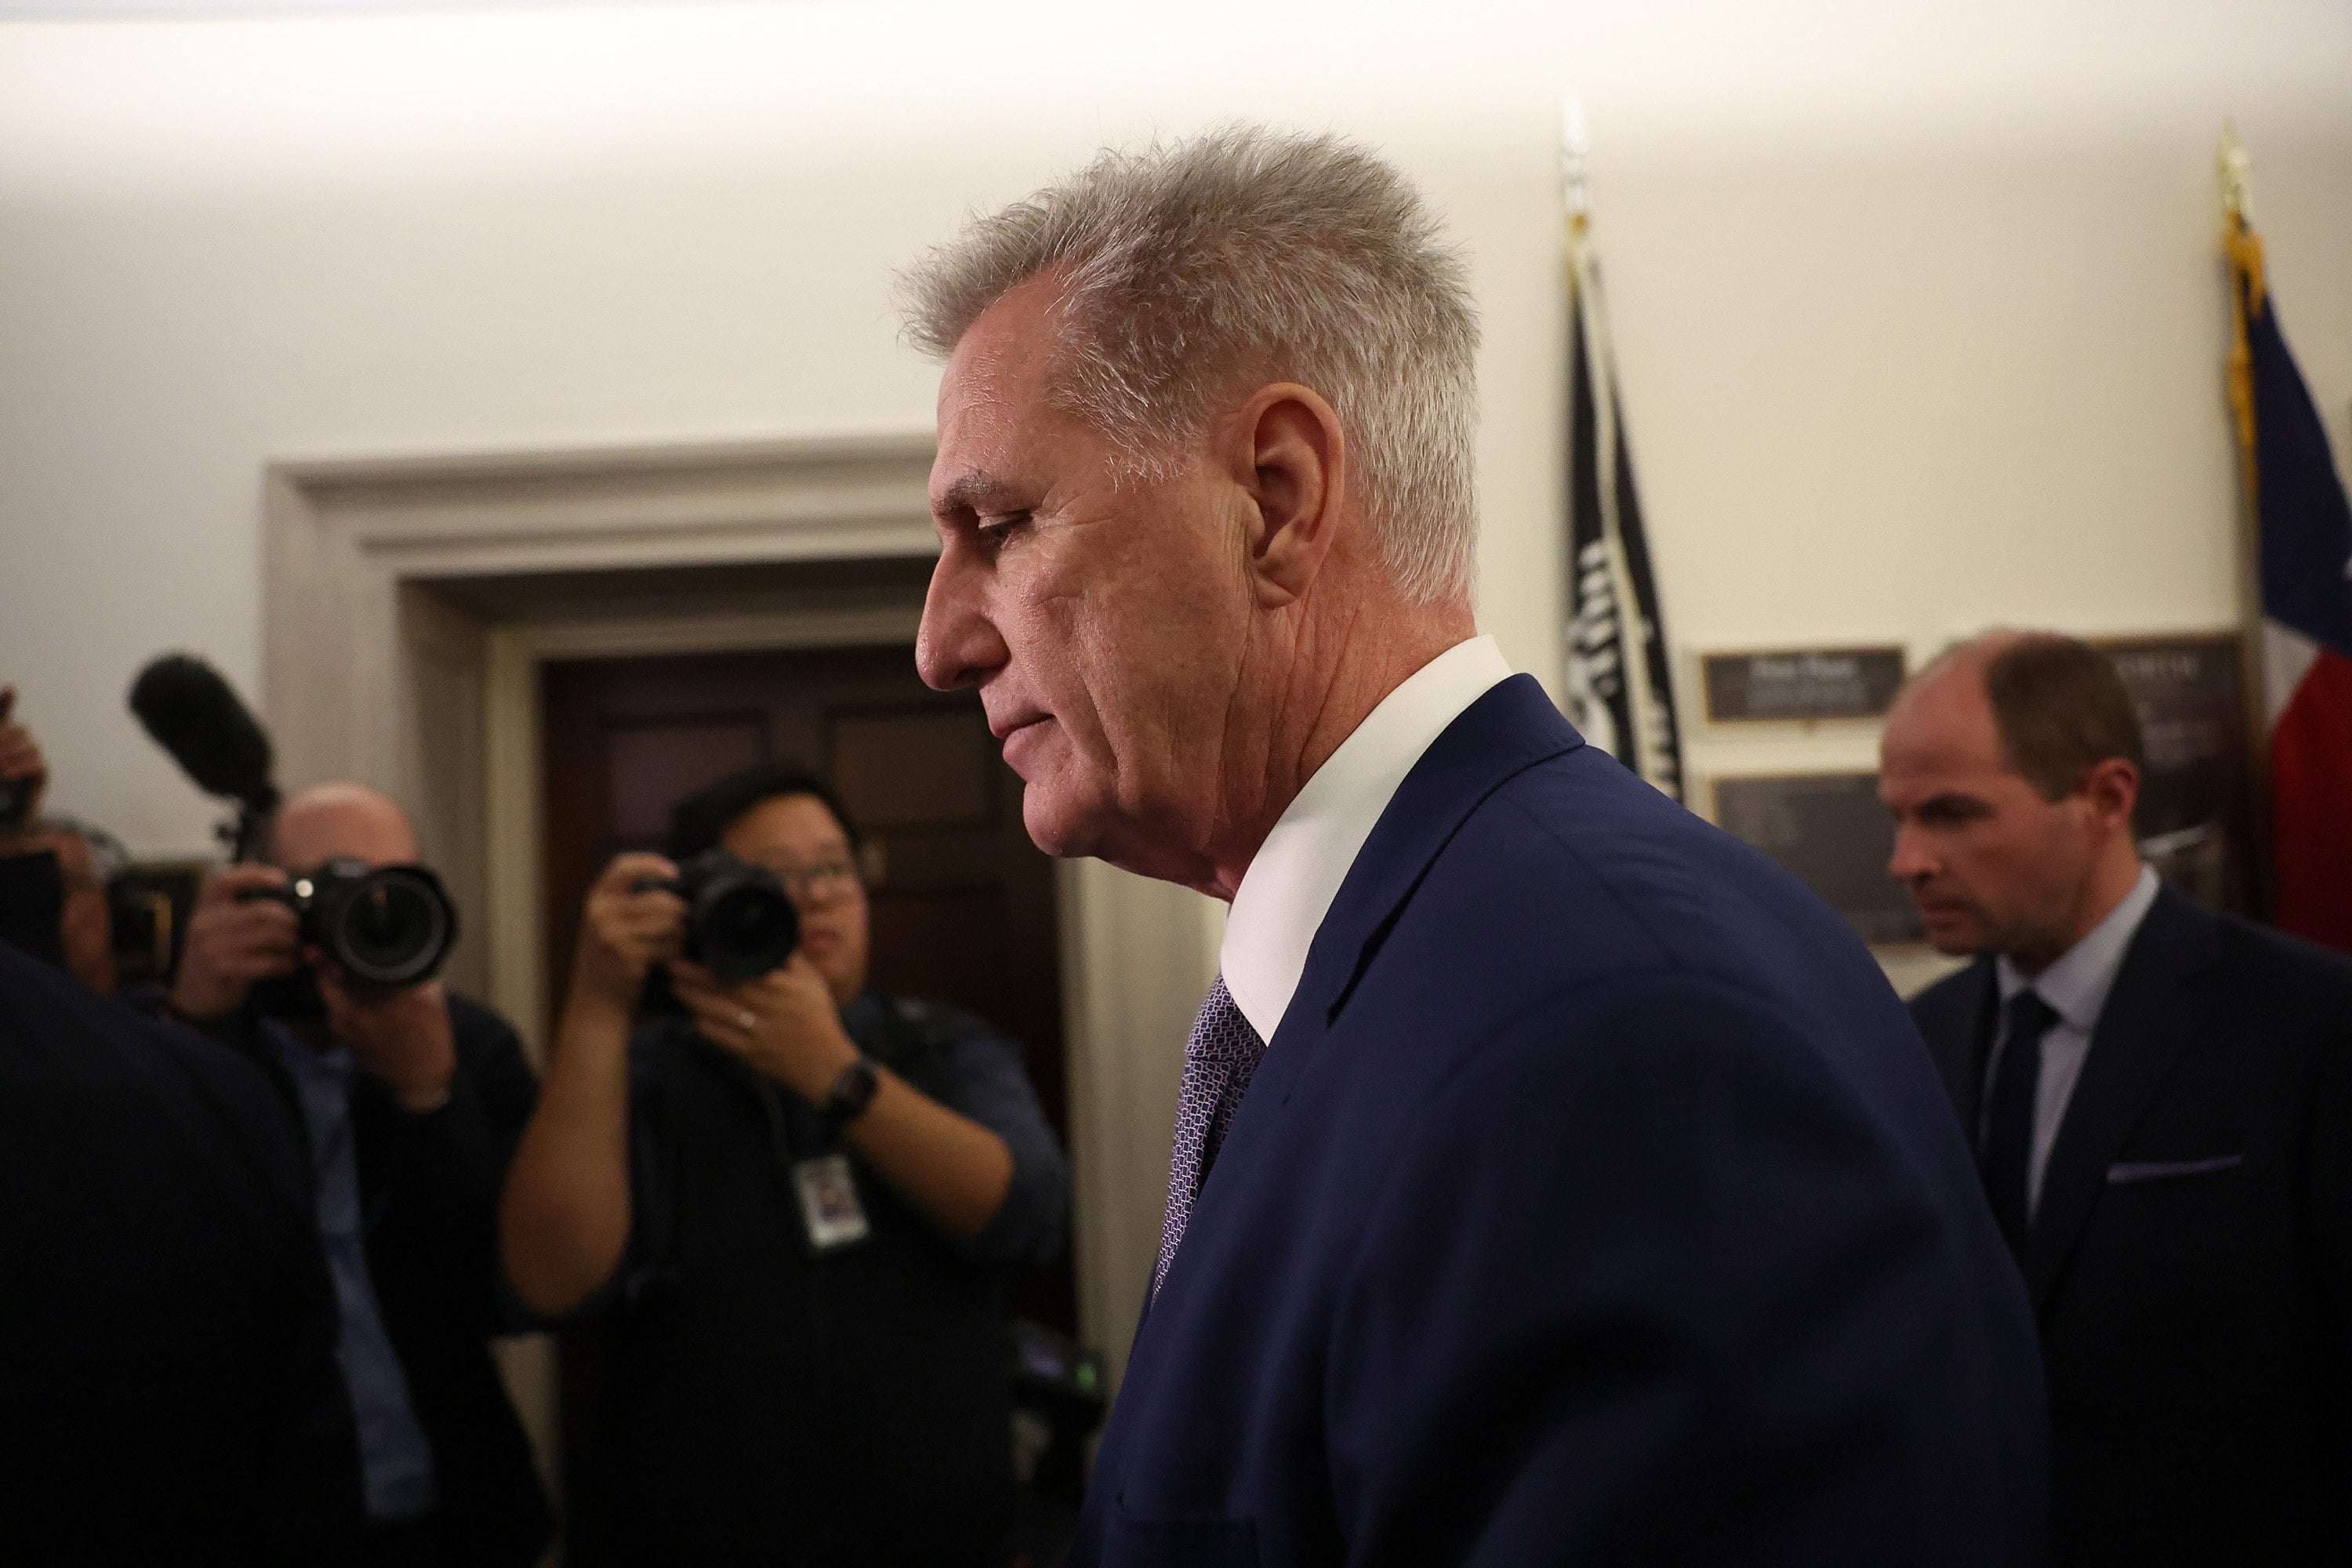 image for Kevin McCarthy 'Shoves' Republican Colleague, Sparking Chase